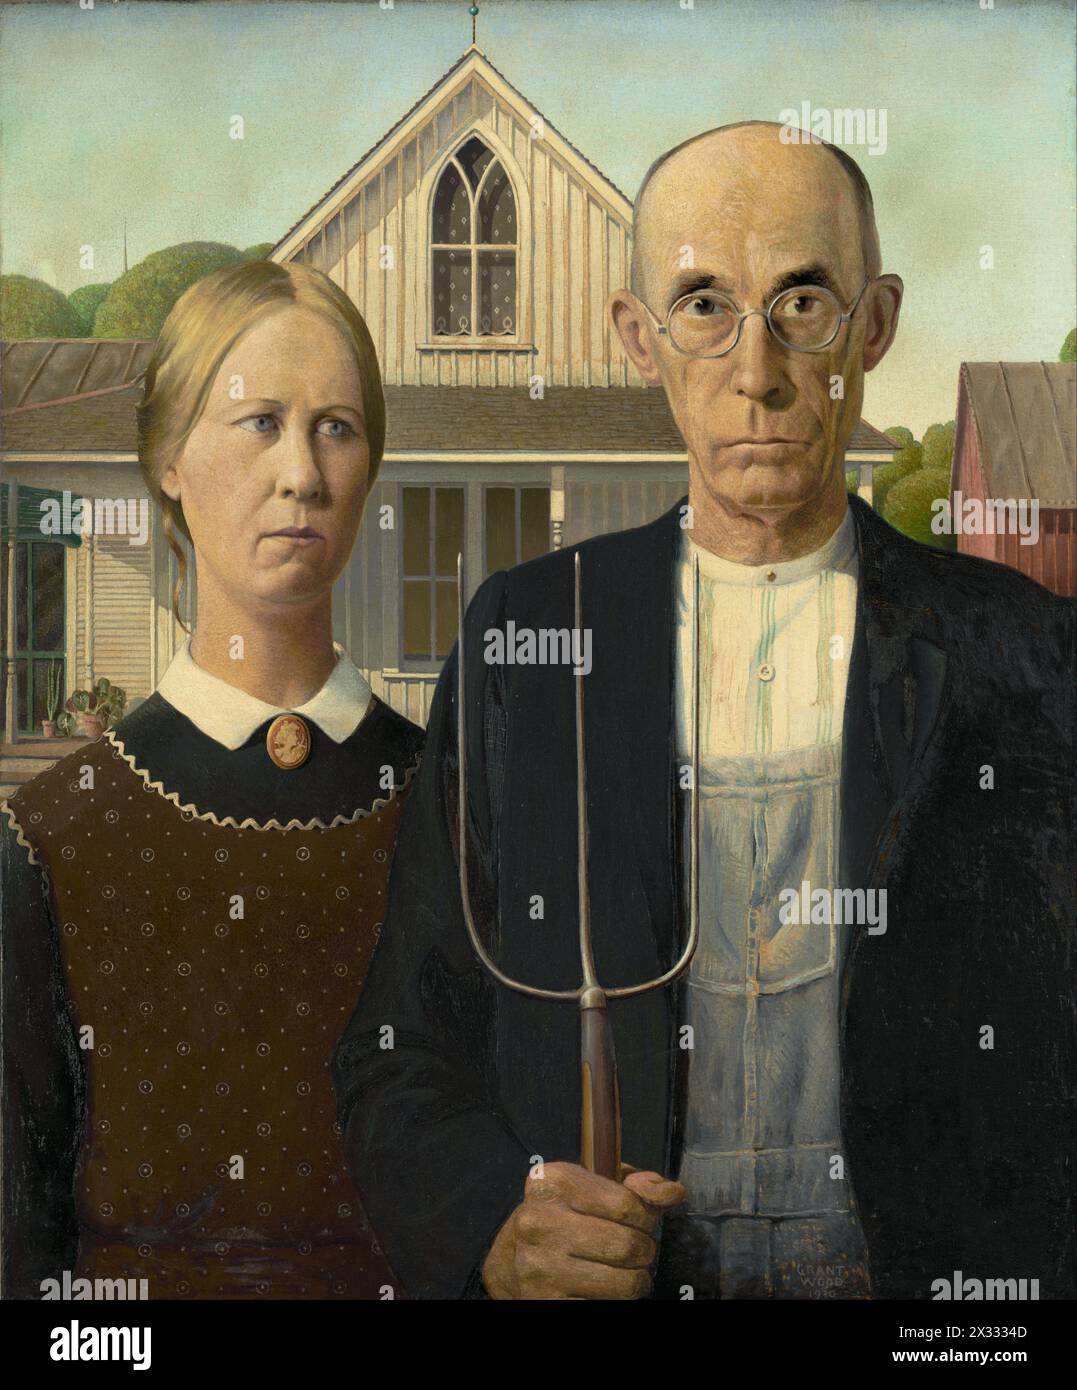 Grant Wood's magnum opus American Gothic, 1930, has become a widely known (and often parodied) icon of social realism. Stock Photo